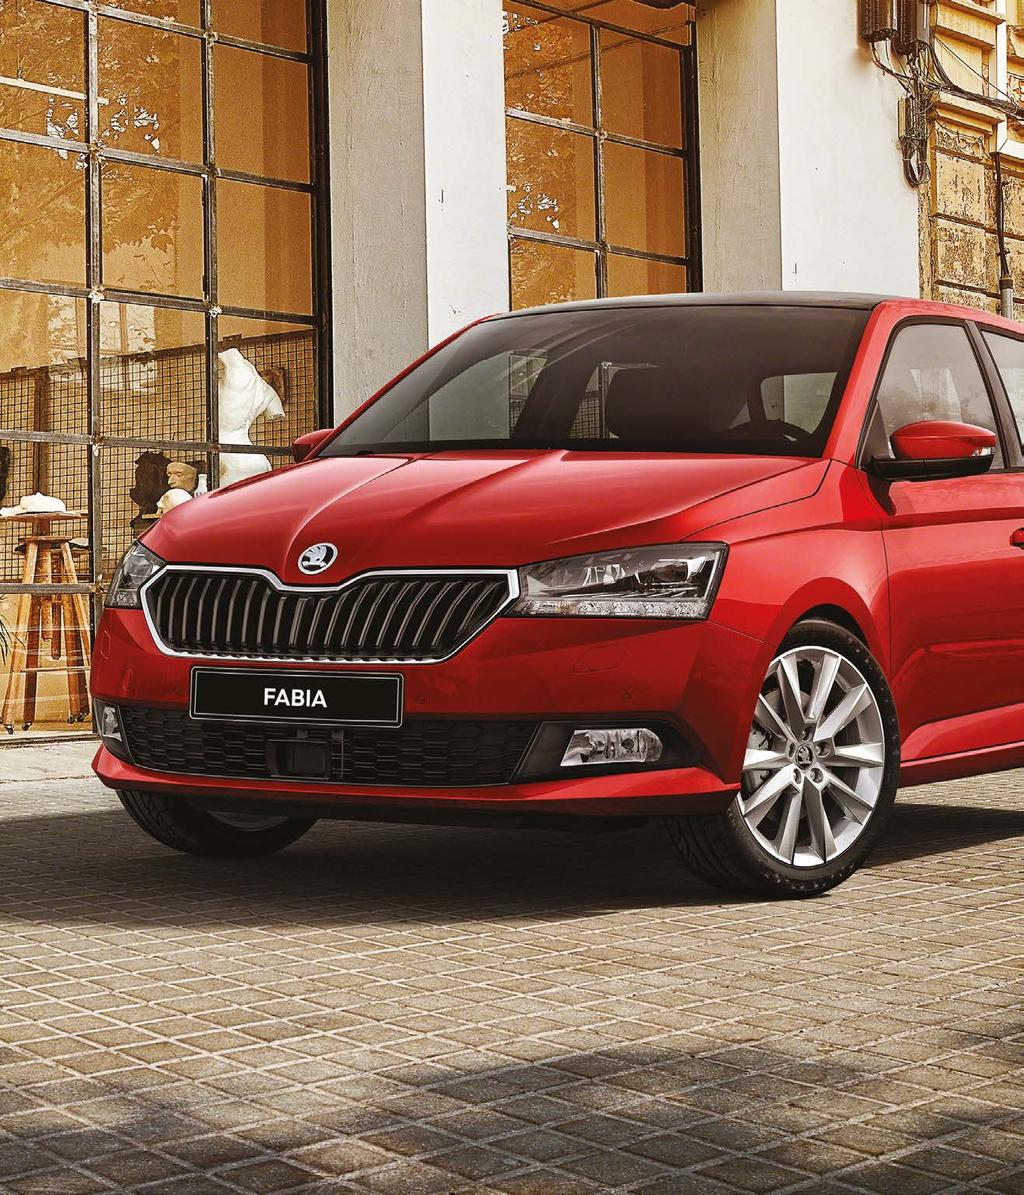 Having ŠKODA Gap Insurance helps to alleviate the additional worry of finding the money to purchase a replacement ŠKODA.